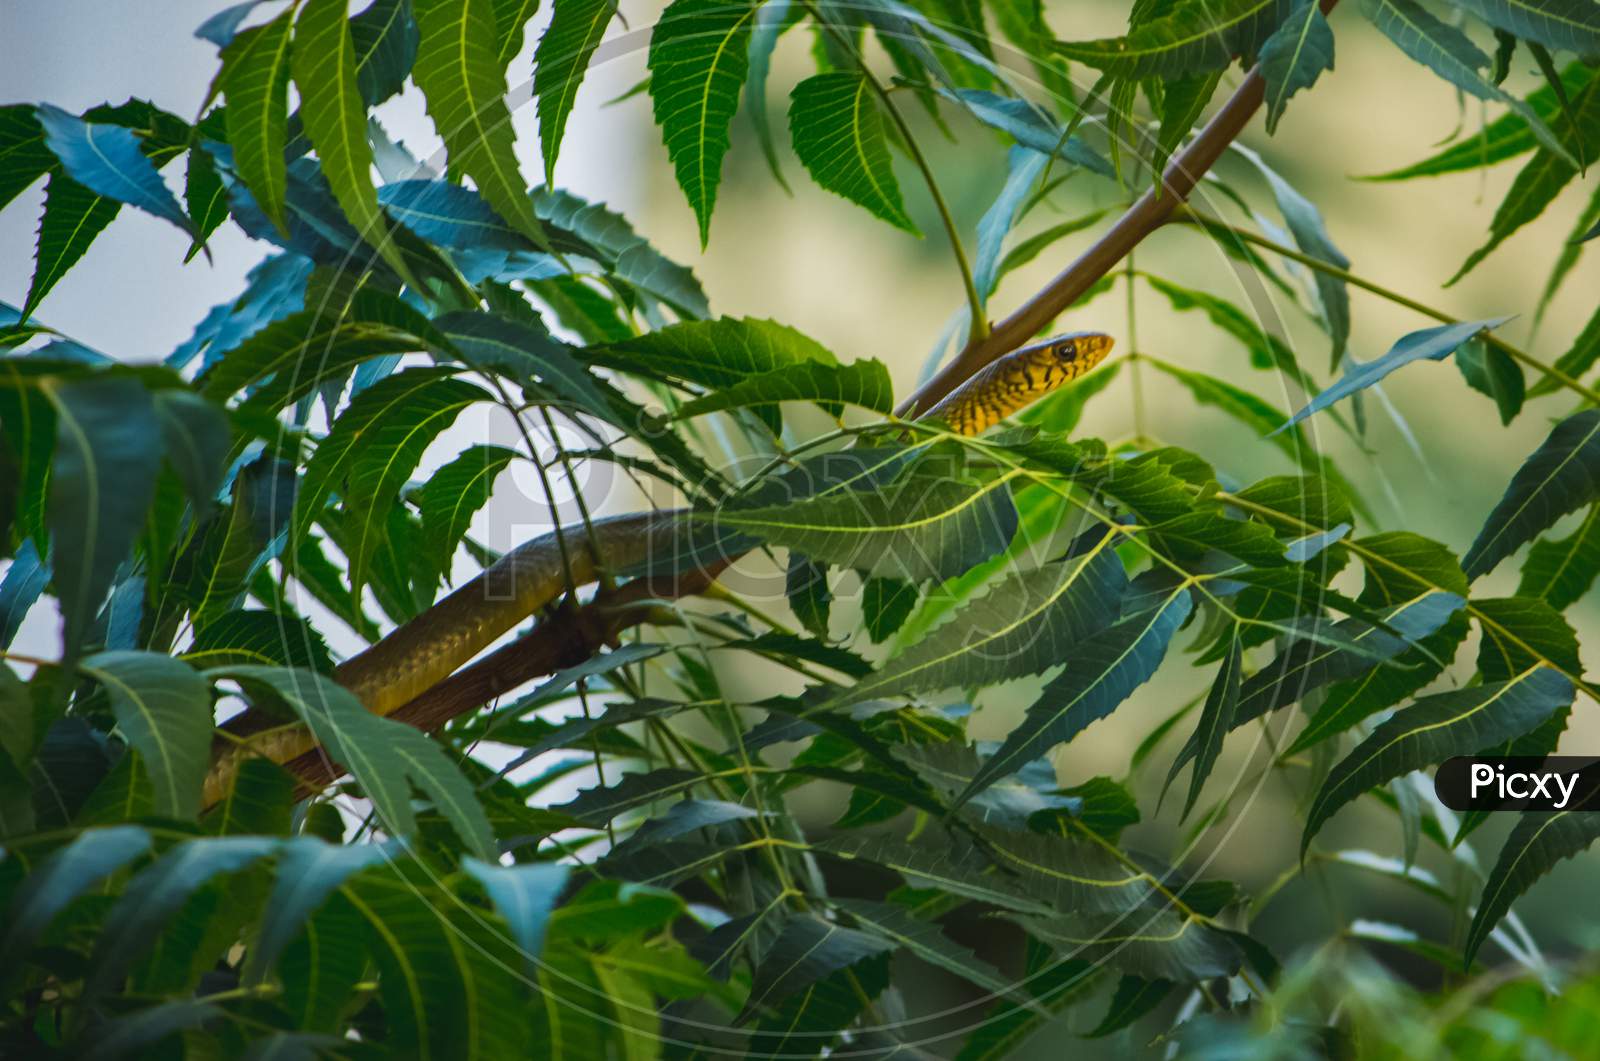 Small Indian Rat Snake On The Neem Tree Branch With Green Neem Leafs .The Snake Head And Eyes Are Visible.The Rat Snake Is A Species Of Colubrid Snake Endemic To Southeast Asia.